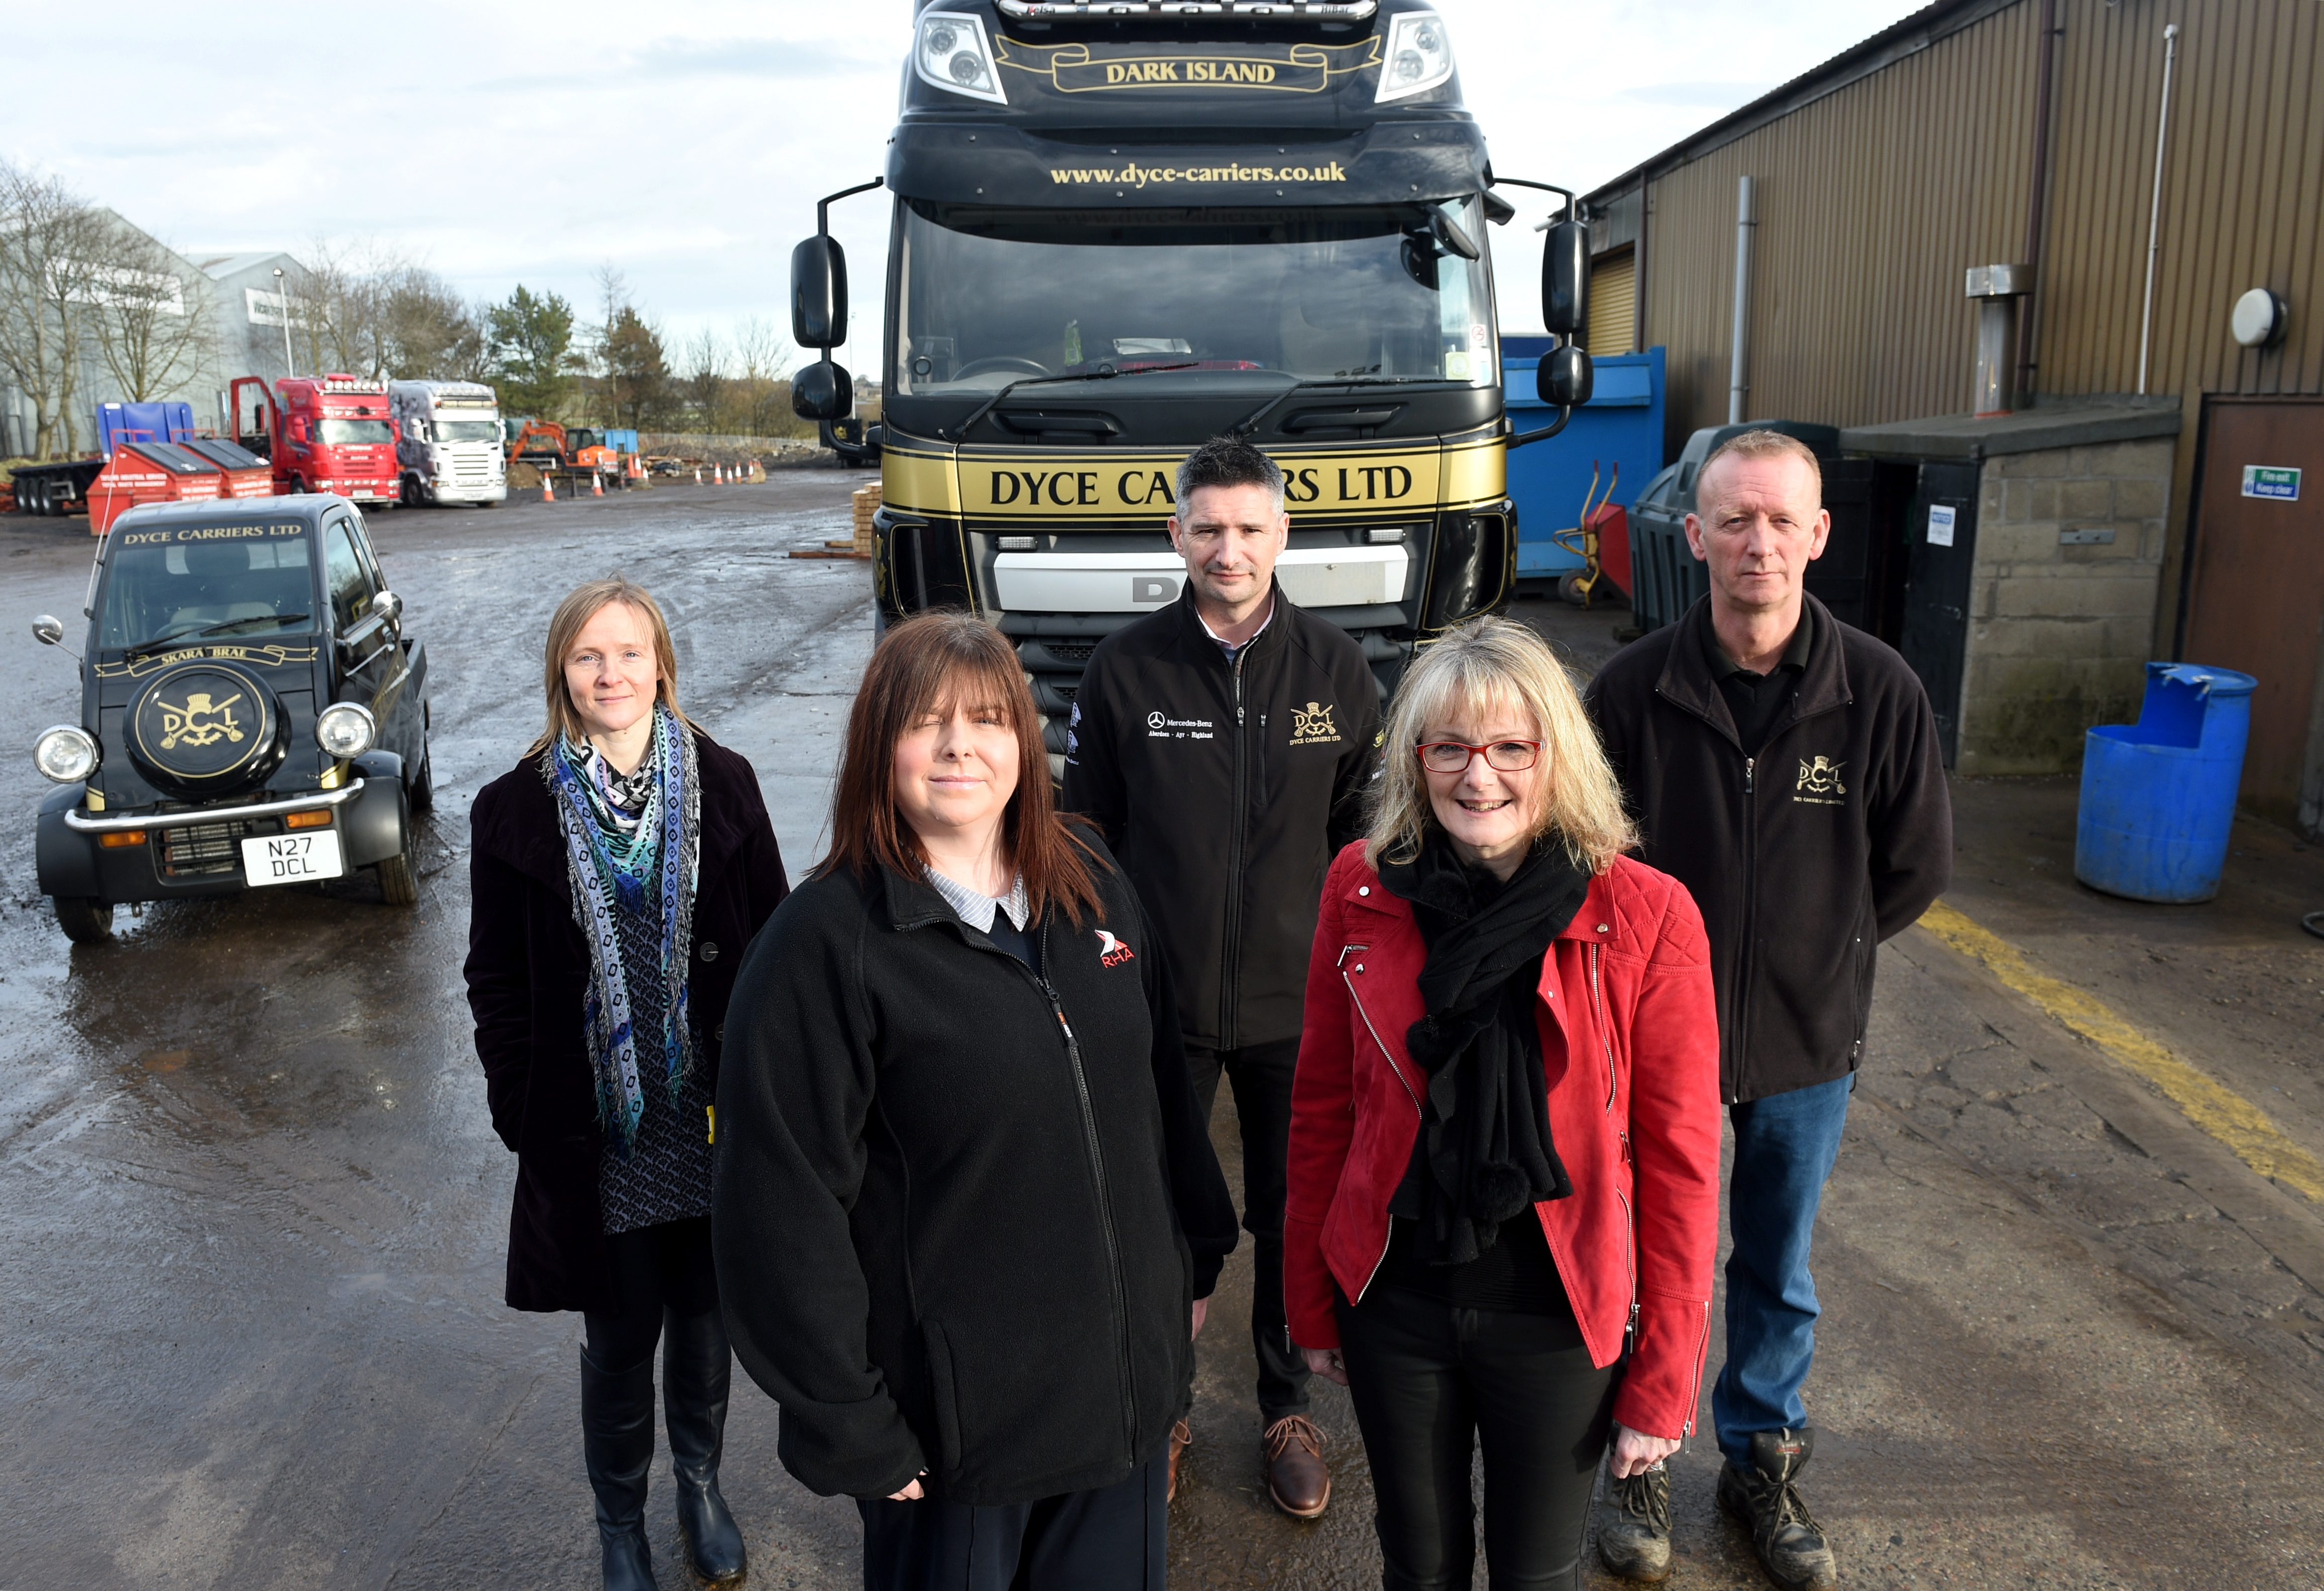 Dyce Carriers and the Road Haulage Association have joined with NHS Grampian to deliver an initiative designed to support good mental health.